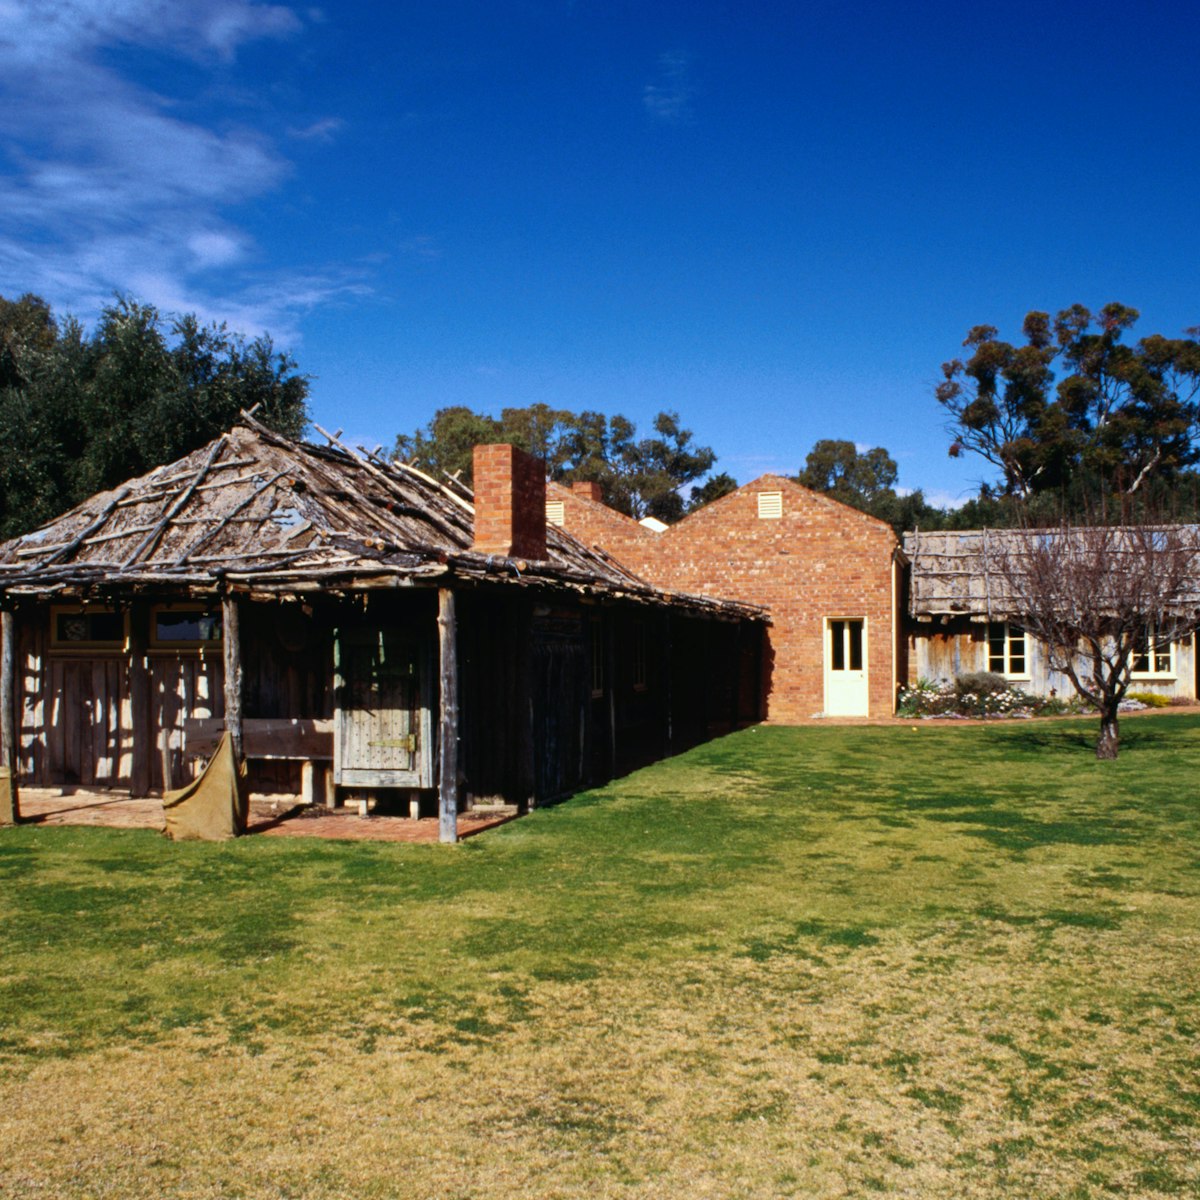 The Old Mildura Homestead, marks the site of the original Mildura pastoral lease and station, the present buildings are accurate reconstructions built in the 1980s